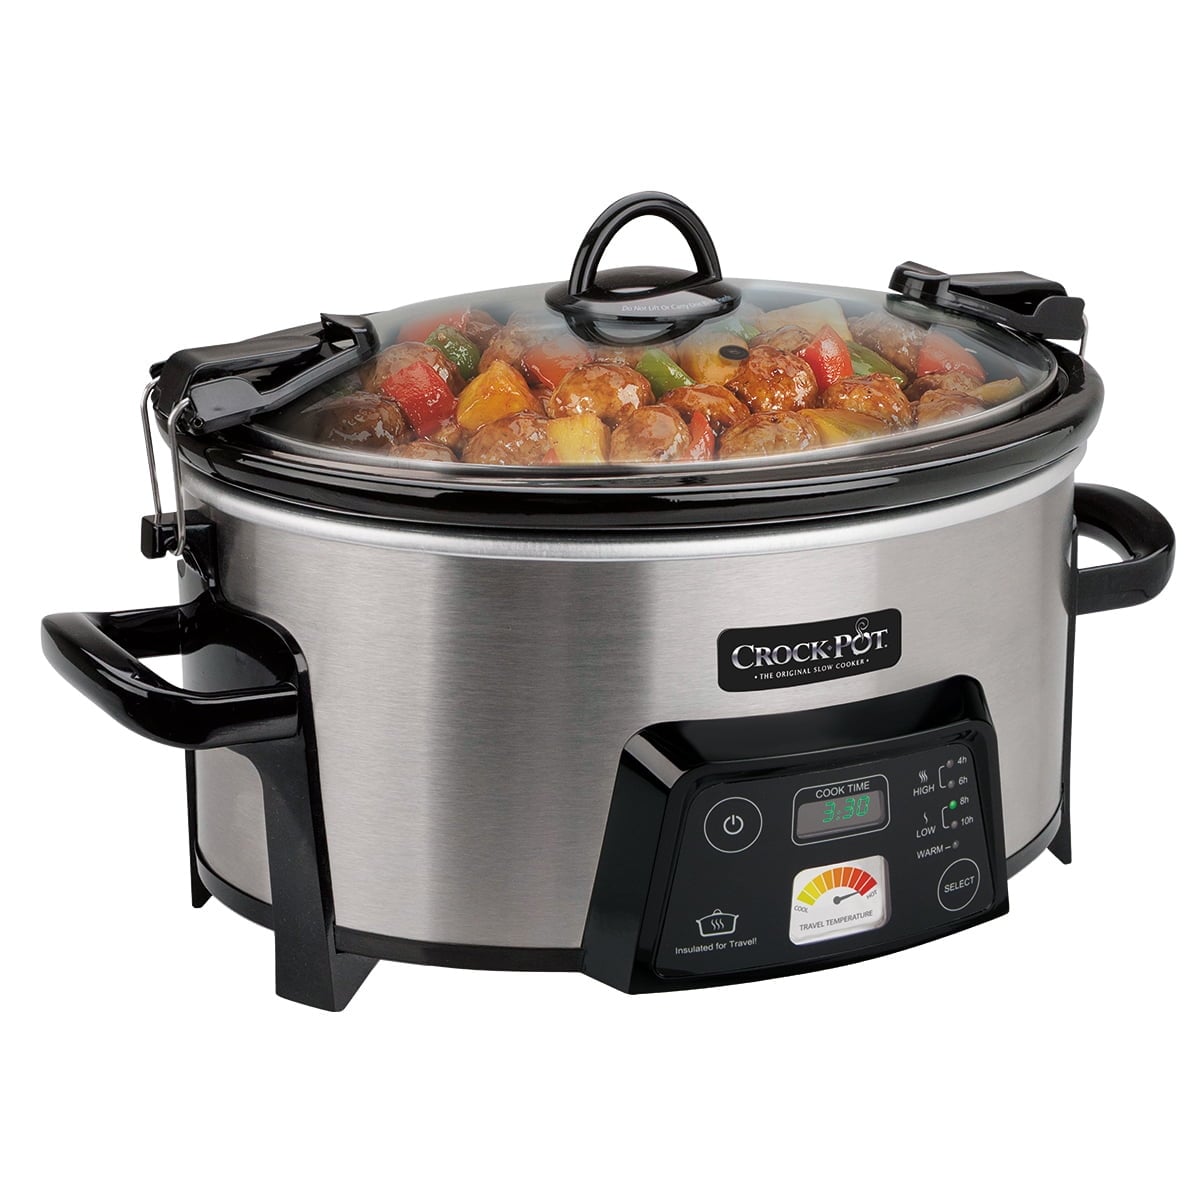 https://ak1.ostkcdn.com/images/products/is/images/direct/ca81dd88c659ed95abfcd65219f86befe4d190bf/6-Quart-Cook-%26-Carry-Digital-Slow-Cooker-with-Heat-Saver-Stoneware%2C-Brushed-Stainless-Steel-%28SCCPCTS605-S%29.jpg